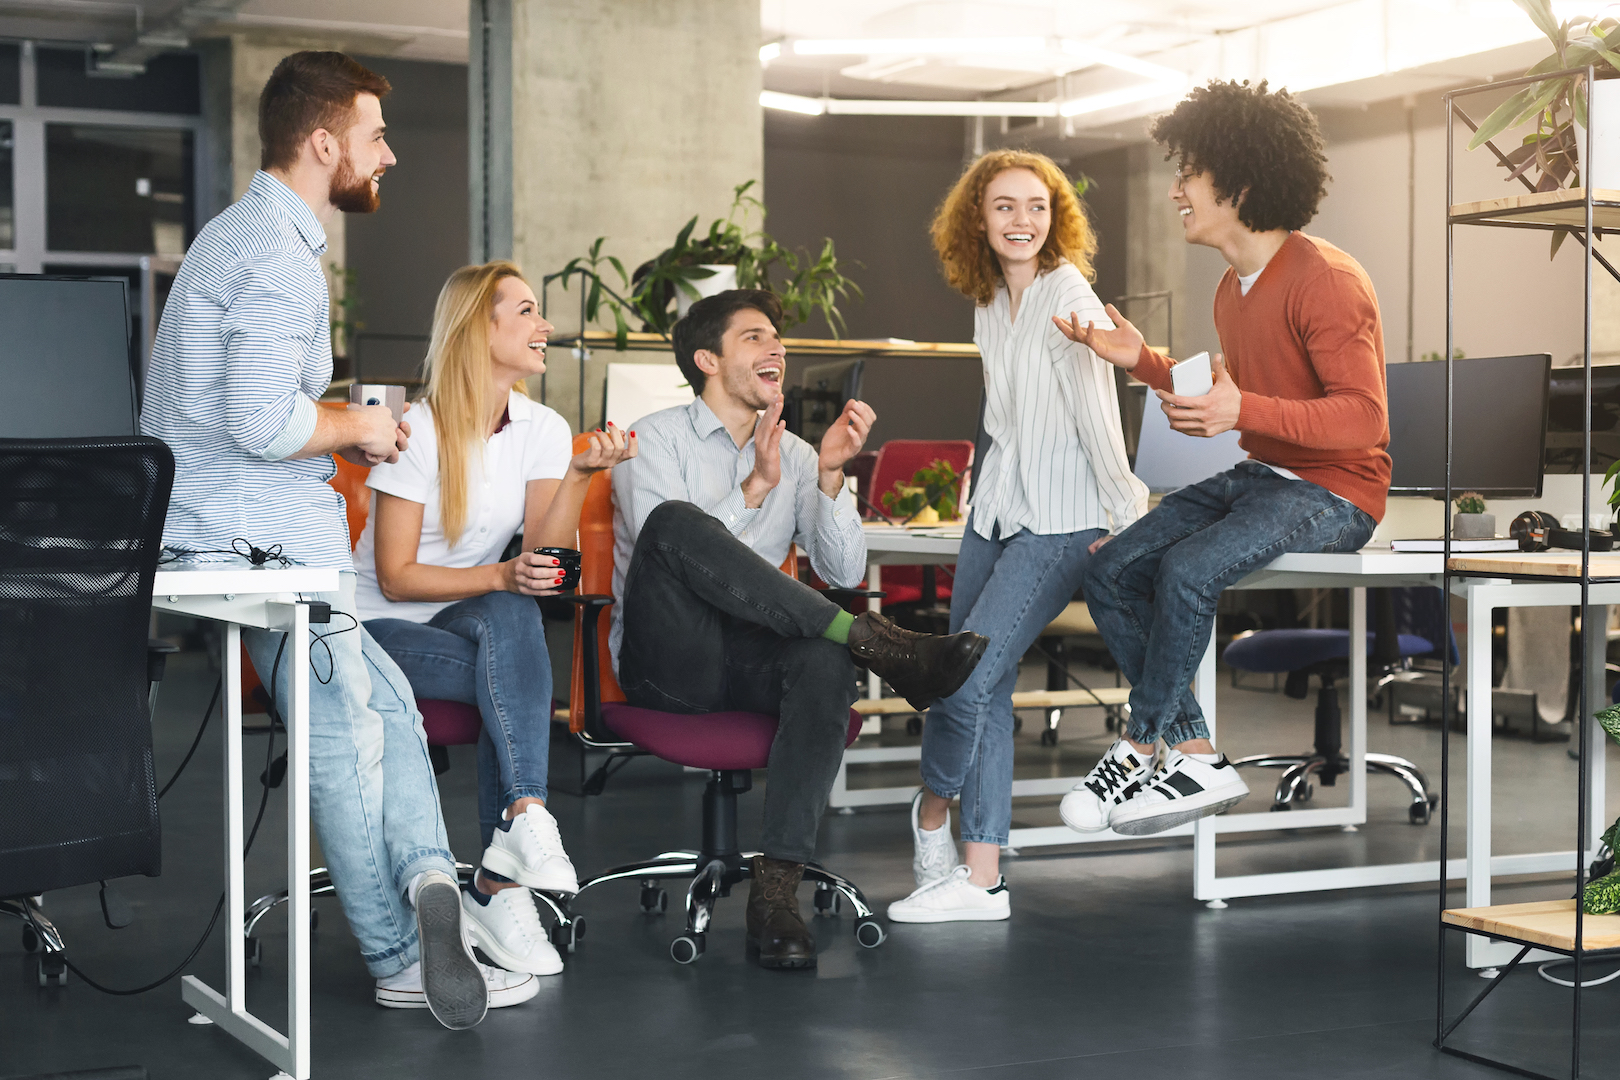 Workplace Socialization: From Small Talk to Strong Teams